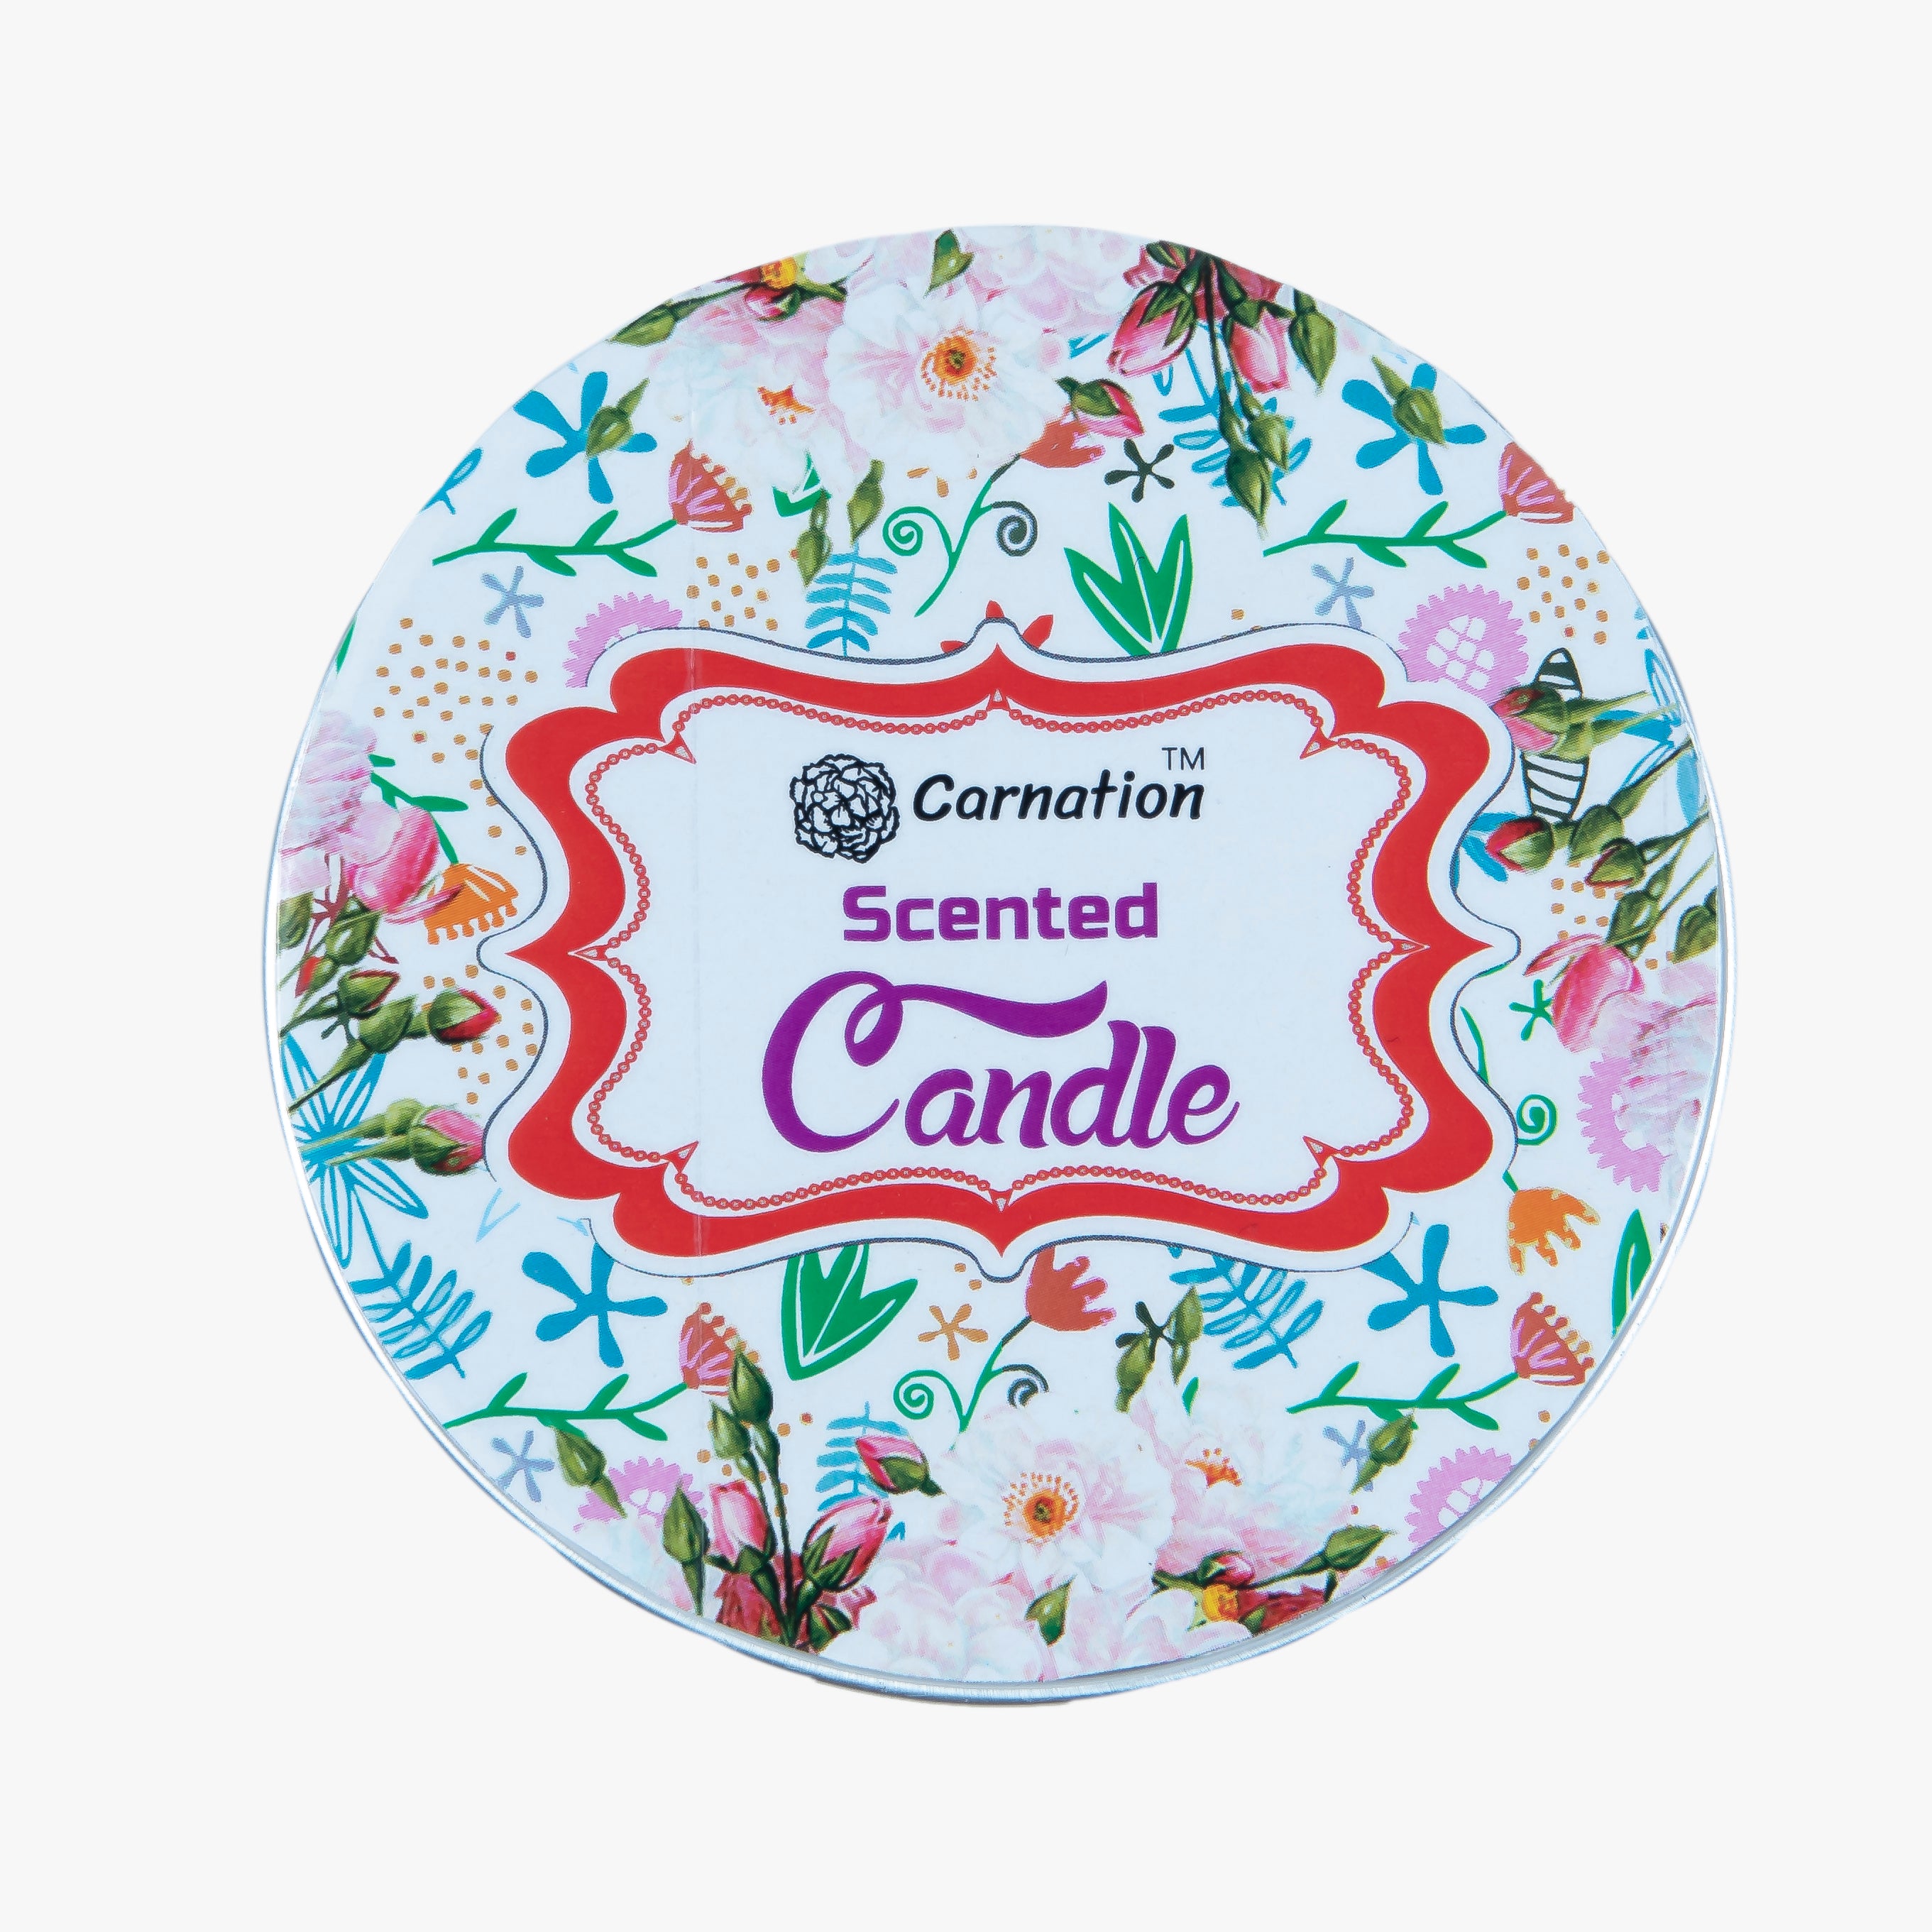 SCENTED CANDLE